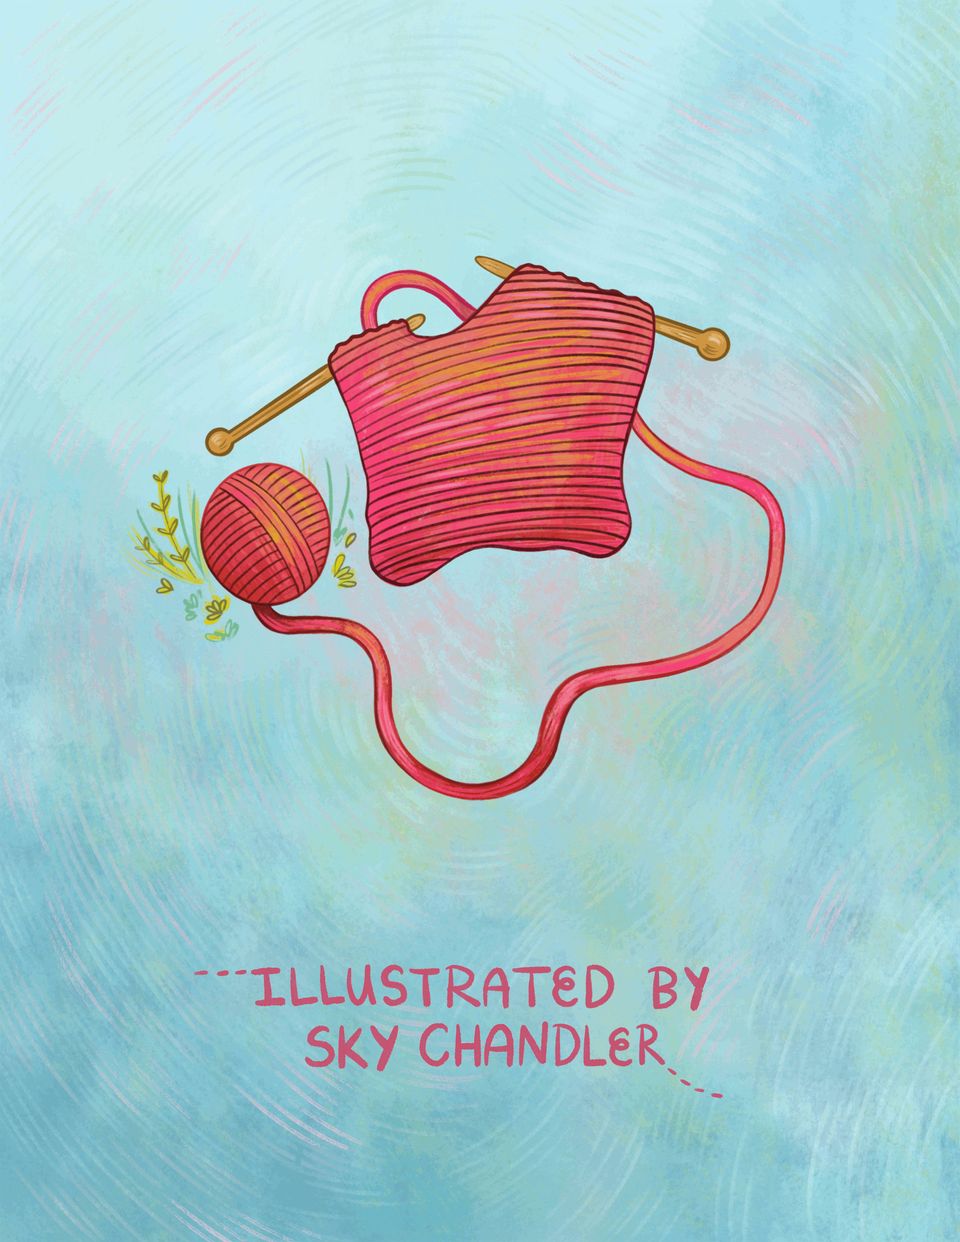 Knitting needles and red yarn sit on a blue background. Text reads: "Illustrated by Sky Chandler."